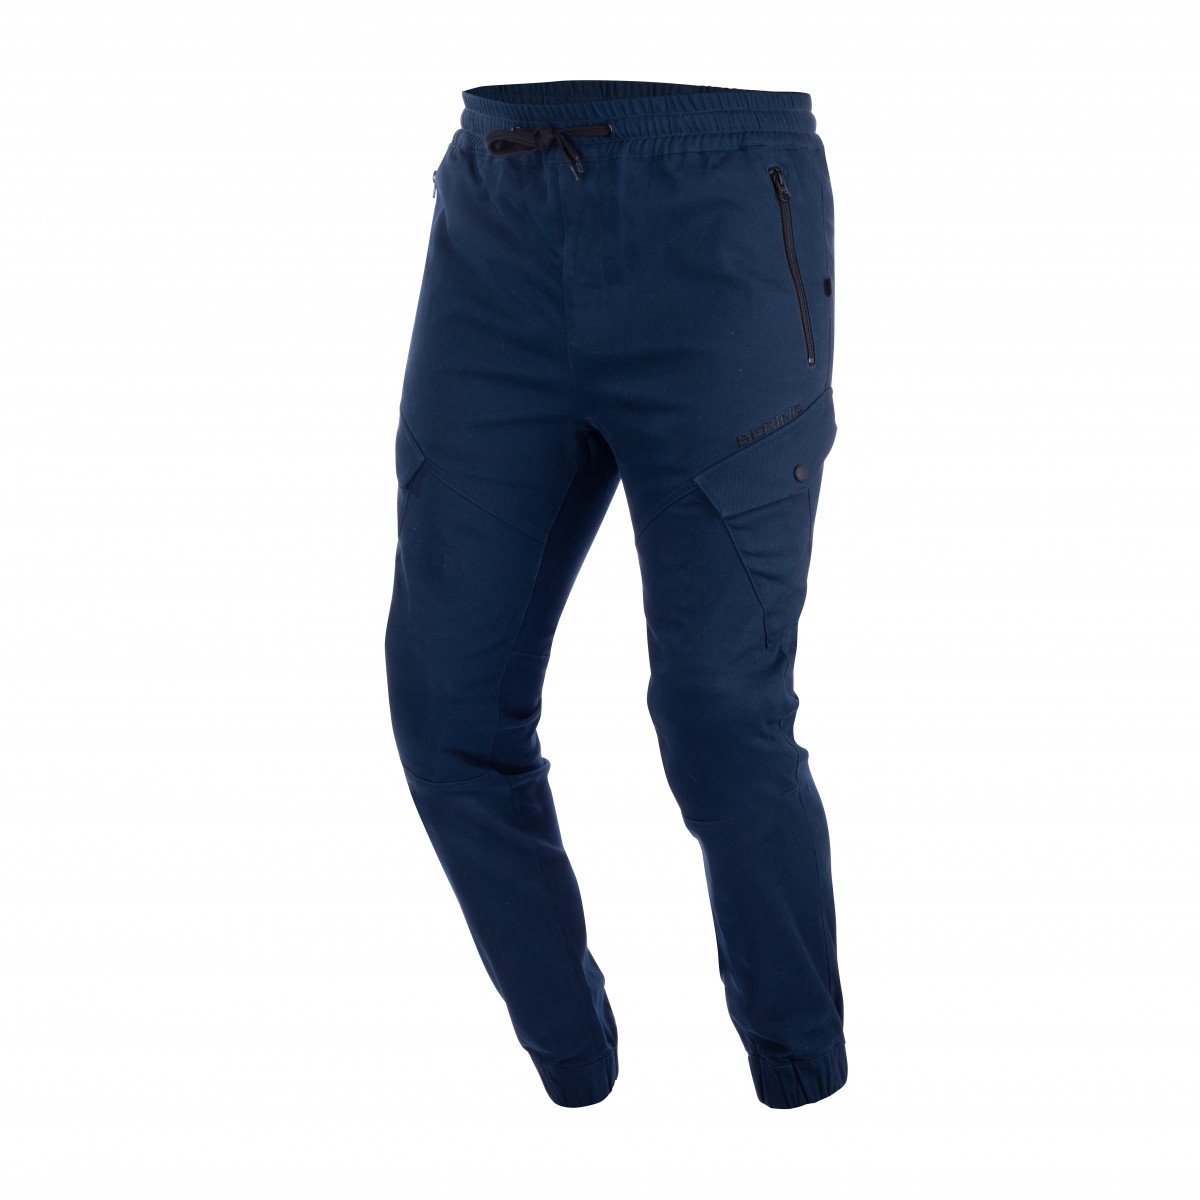 Image of Bering Trousers Richie Navy Blue Size M ID 3660815167793